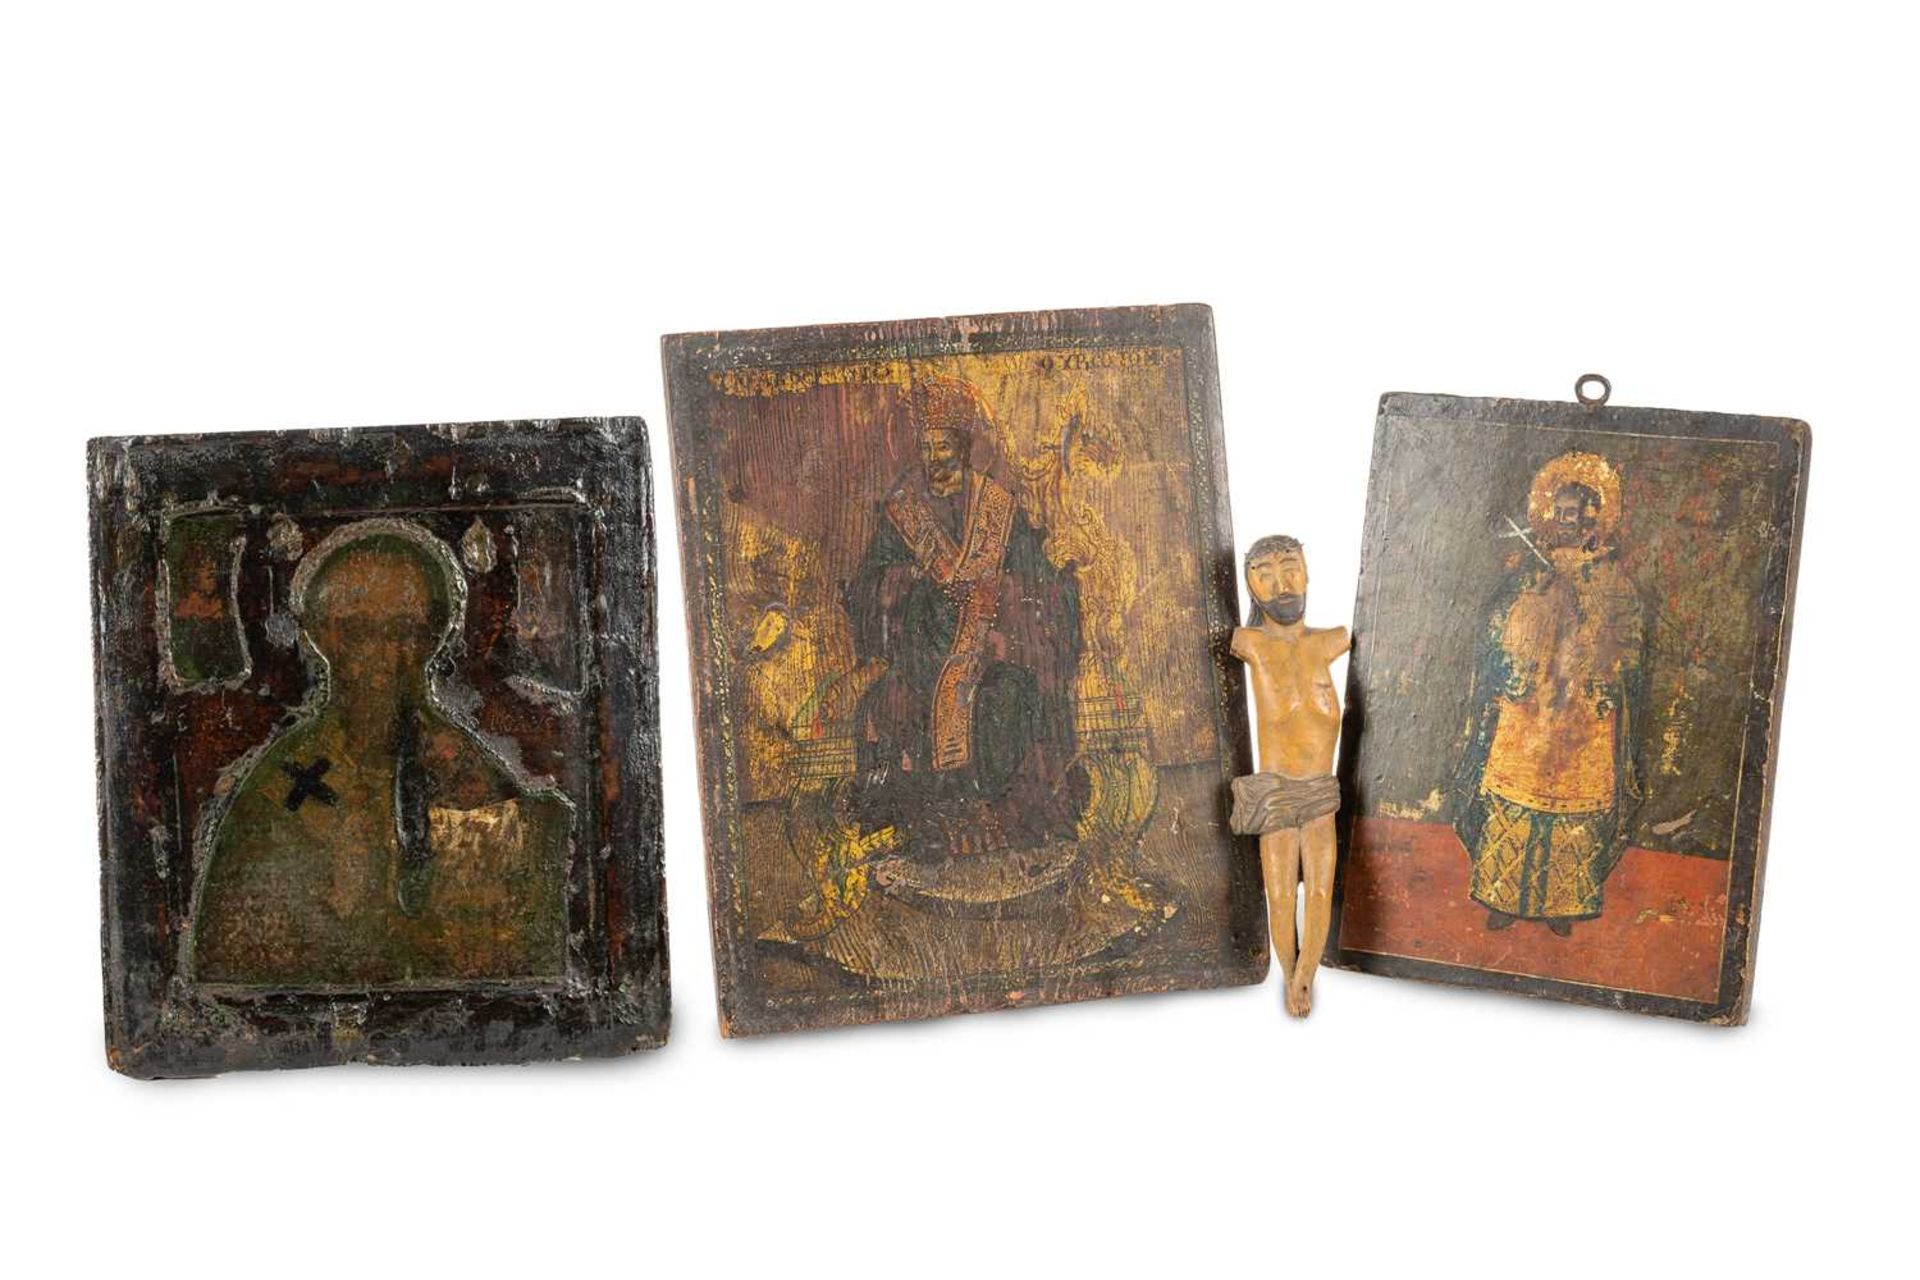 A large 19th /20th-century Russian icon painted with a single Saint in blue robes with a radiant